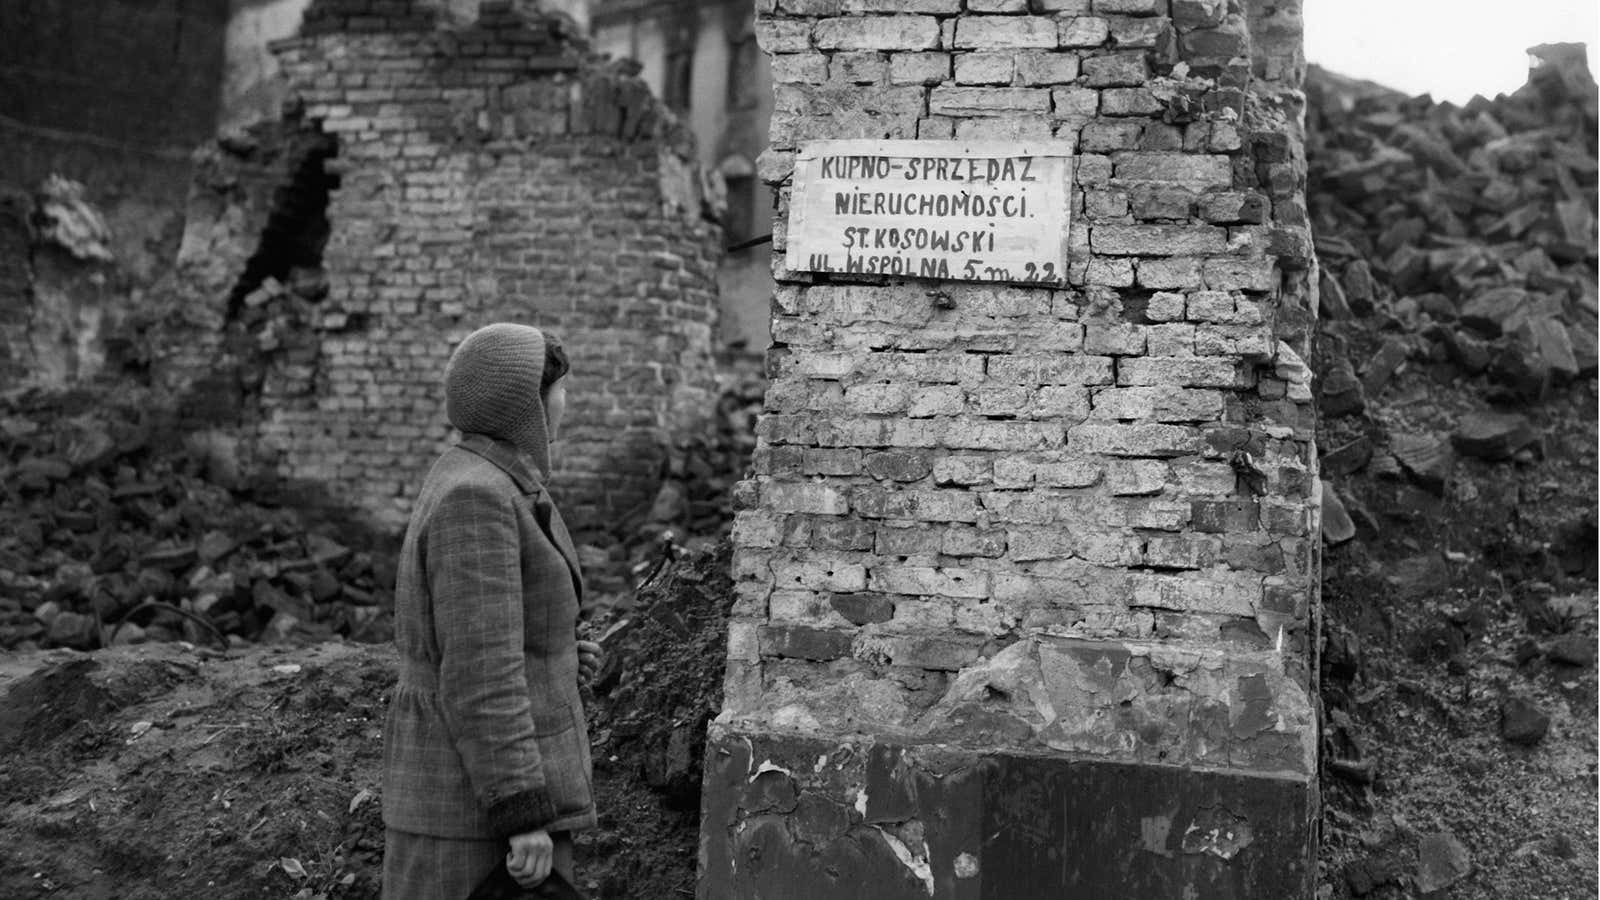 Even in the rubble of WW2-shattered Warsaw, signs popped up for small businesses looking to buy and sell furniture and other goods. Oct. 13, 1945.